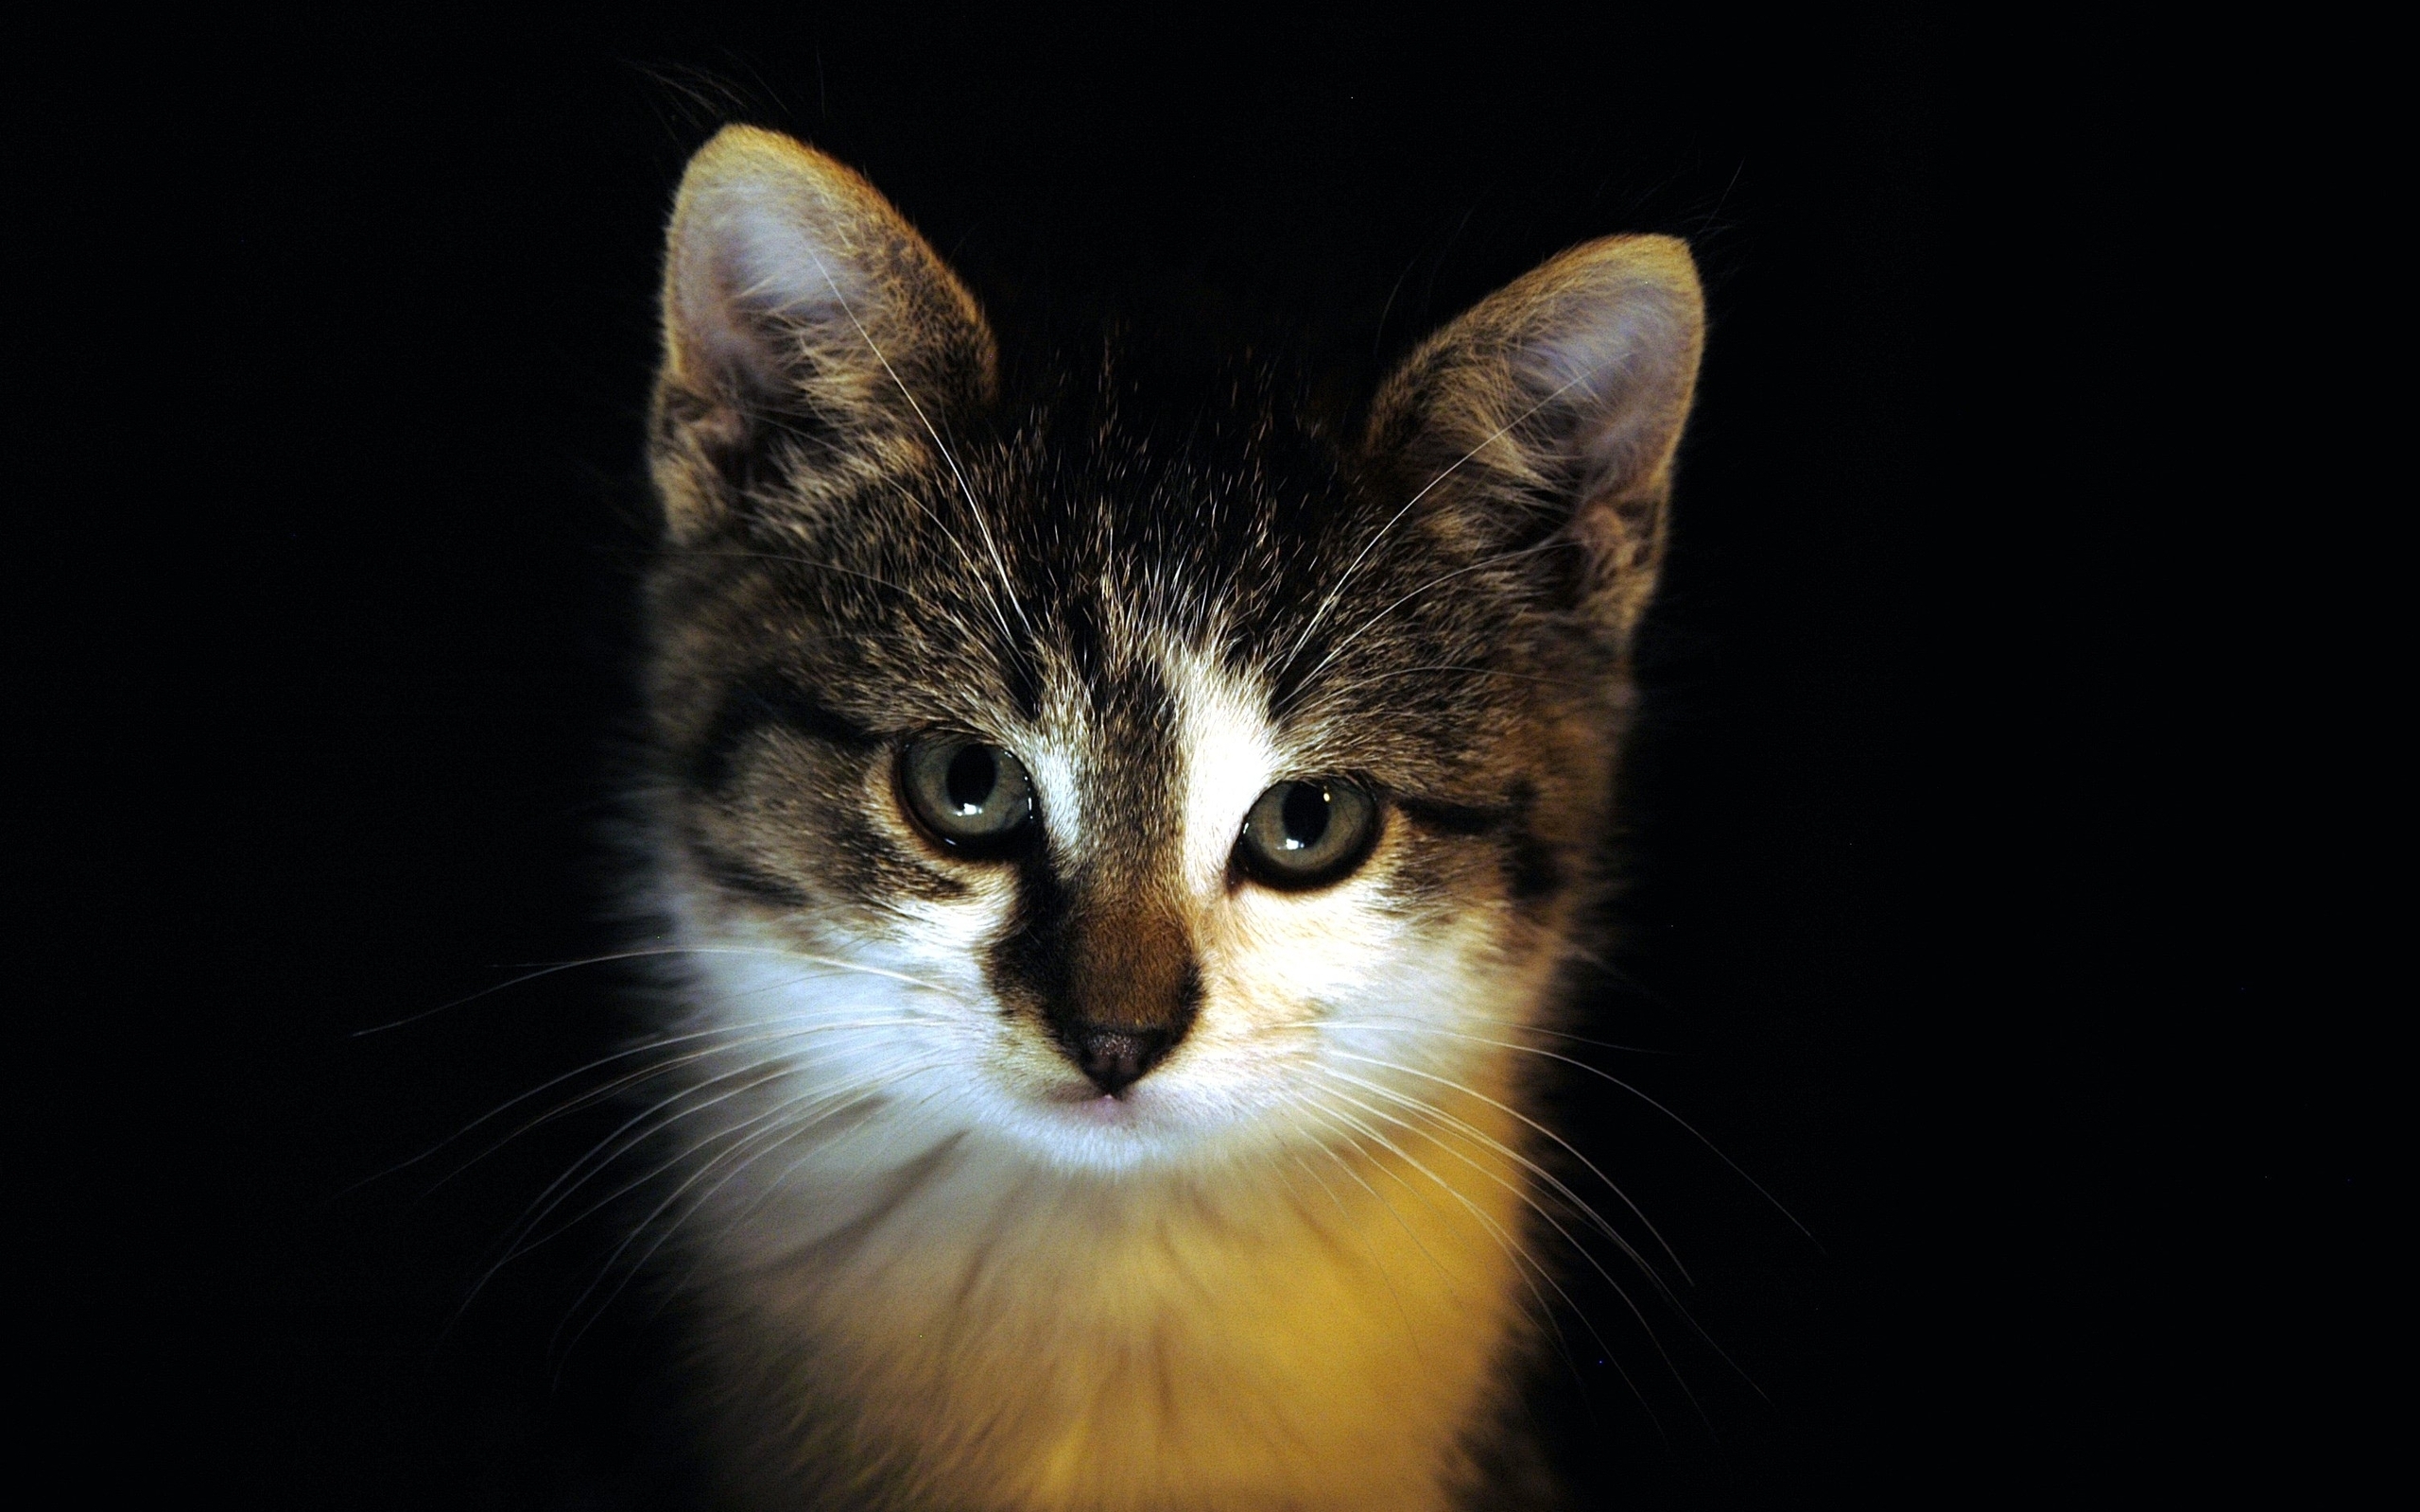 Image: Cat, muzzle, fluffy, color, look, black background